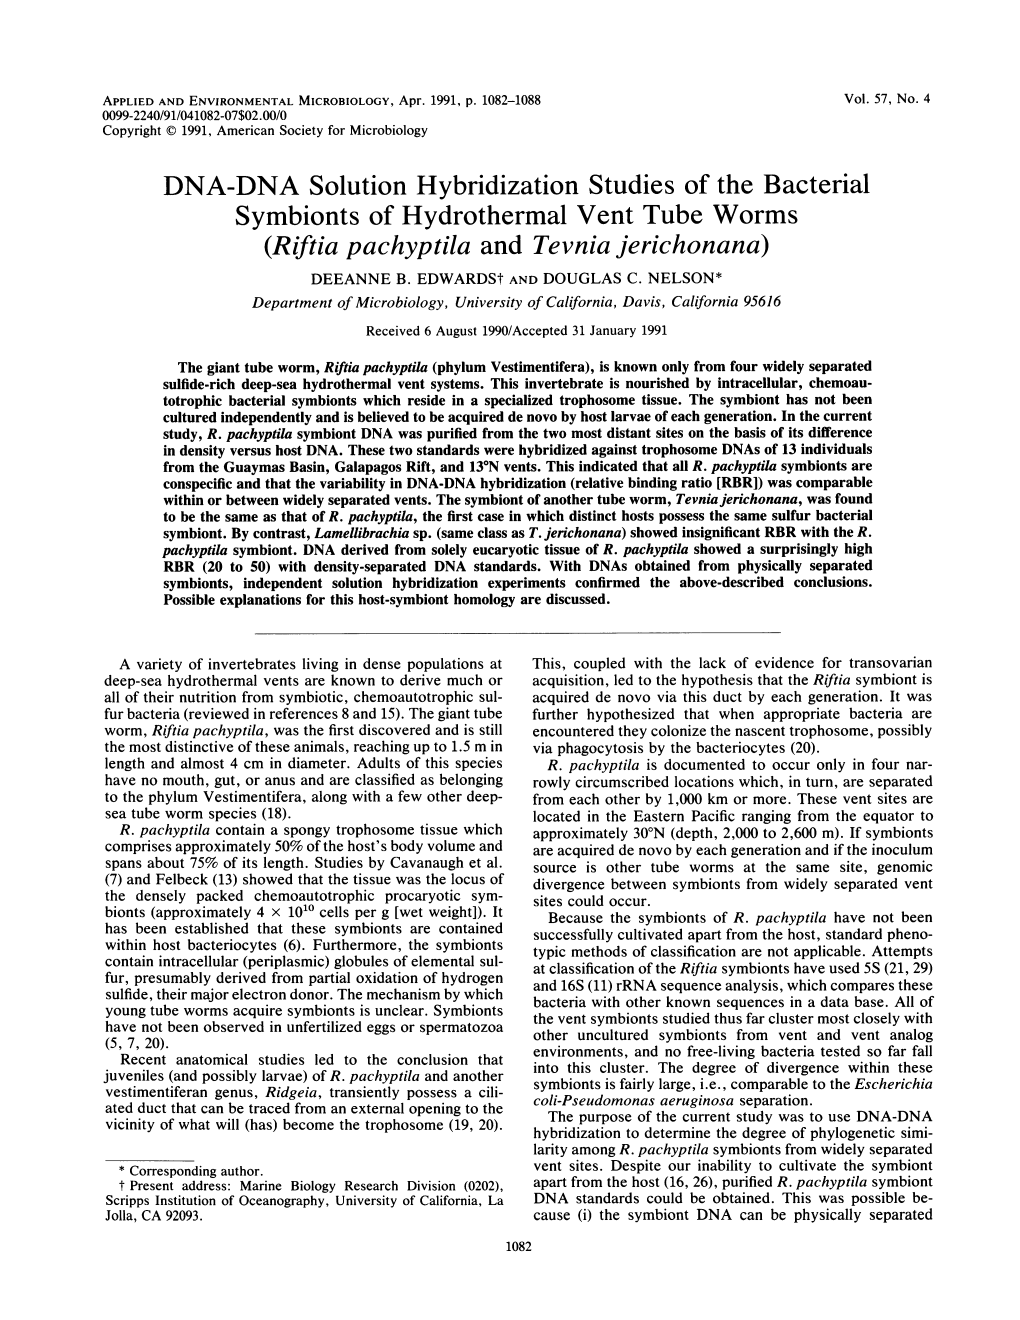 DNA-DNA Solution Hybridization Studies of the Bacterial Symbionts of Hydrothermal Vent Tube Worms (Riftia Pachyptila and Tevnia Jerichonana) DEEANNE B